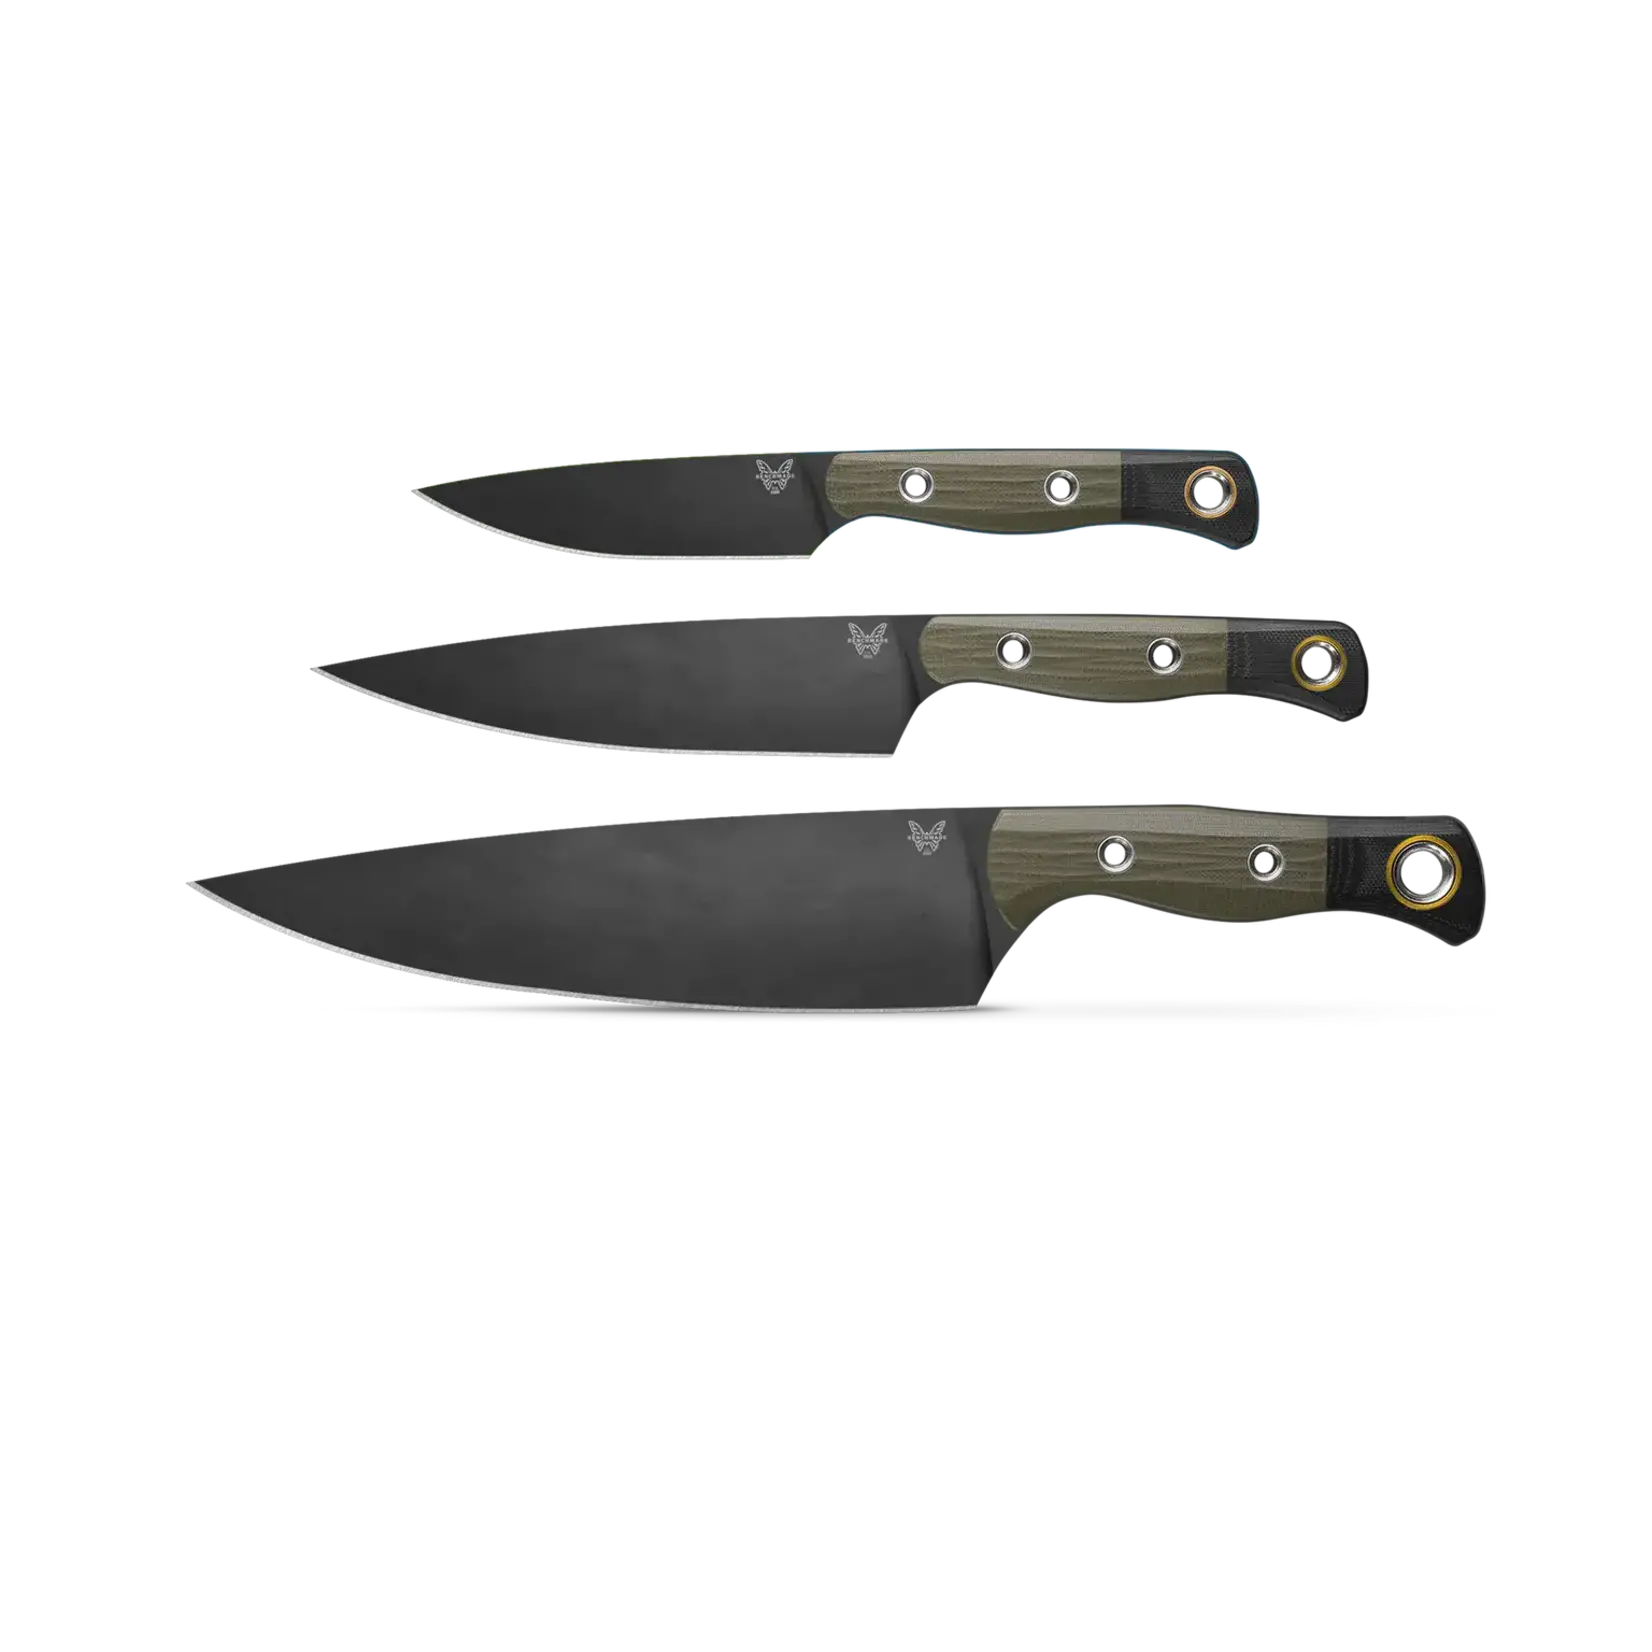 Benchmade Benchmade CPM154 & G10 Olive Green 3-Piece Kitchen Culinary Set